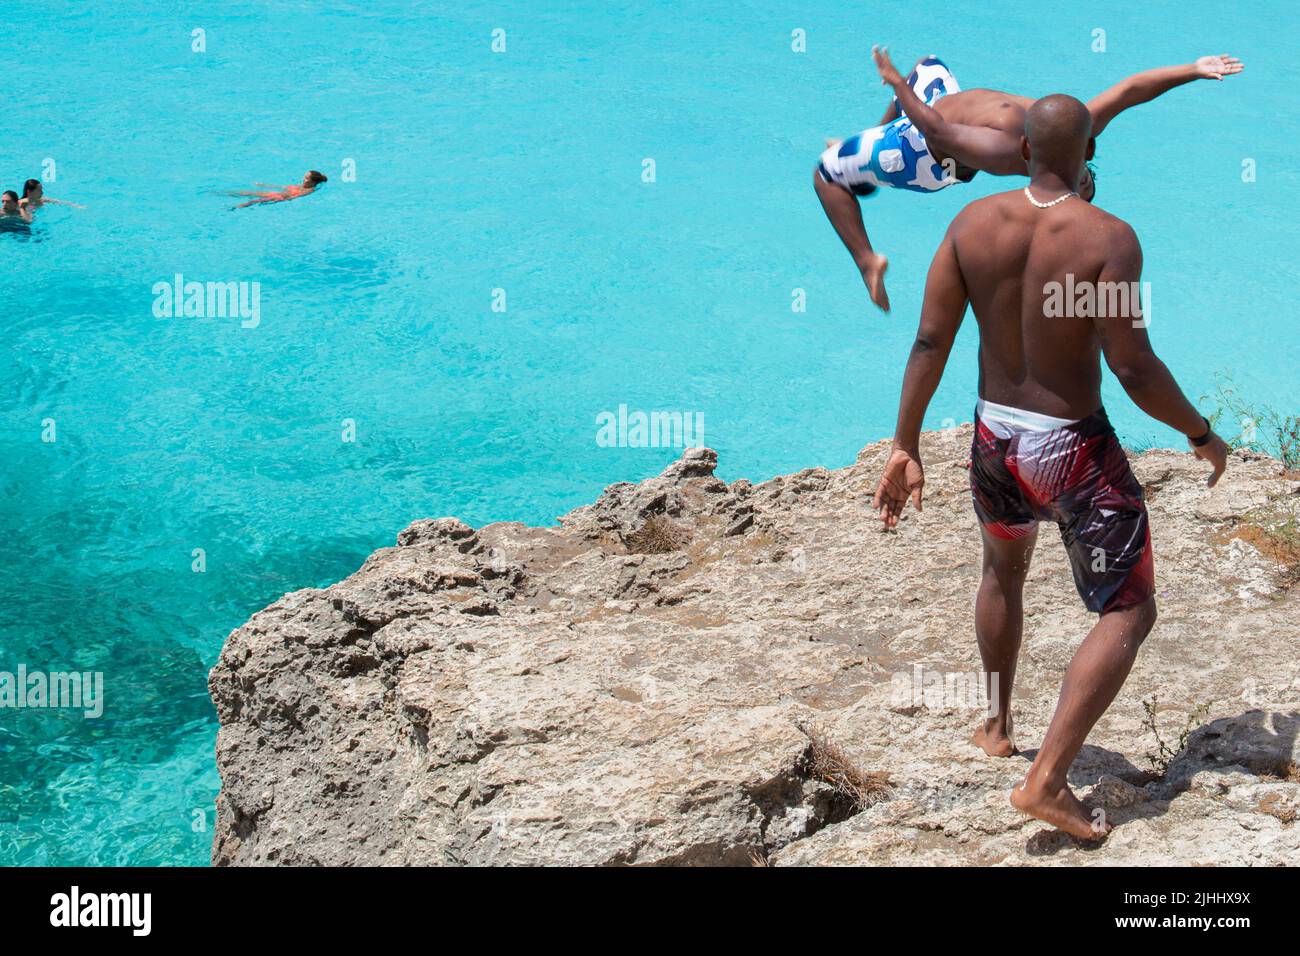 young man jumping off cliff into water. Stock Photo